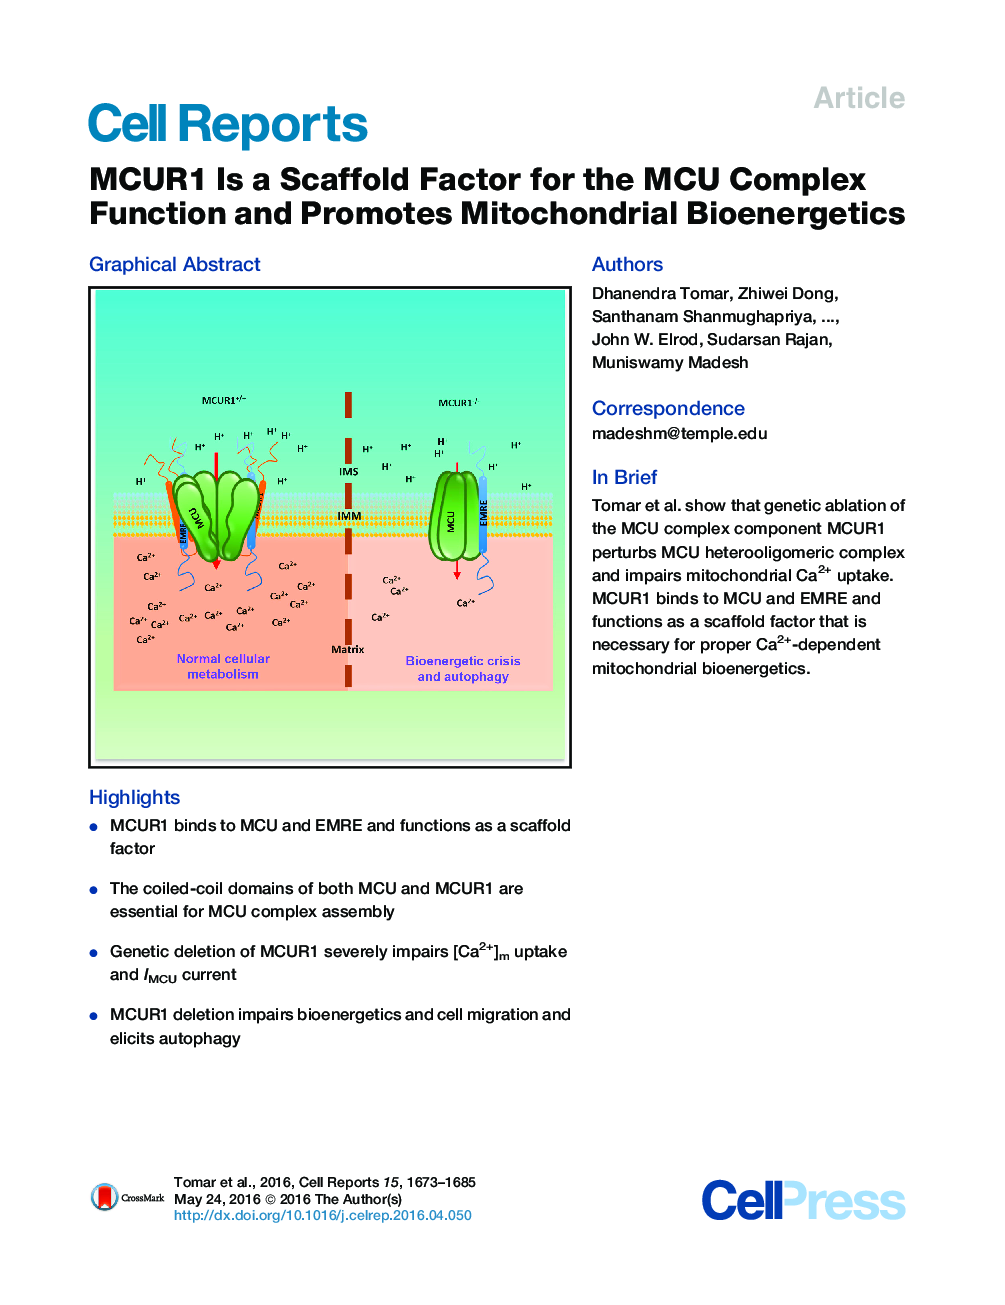 MCUR1 Is a Scaffold Factor for the MCU Complex Function and Promotes Mitochondrial Bioenergetics